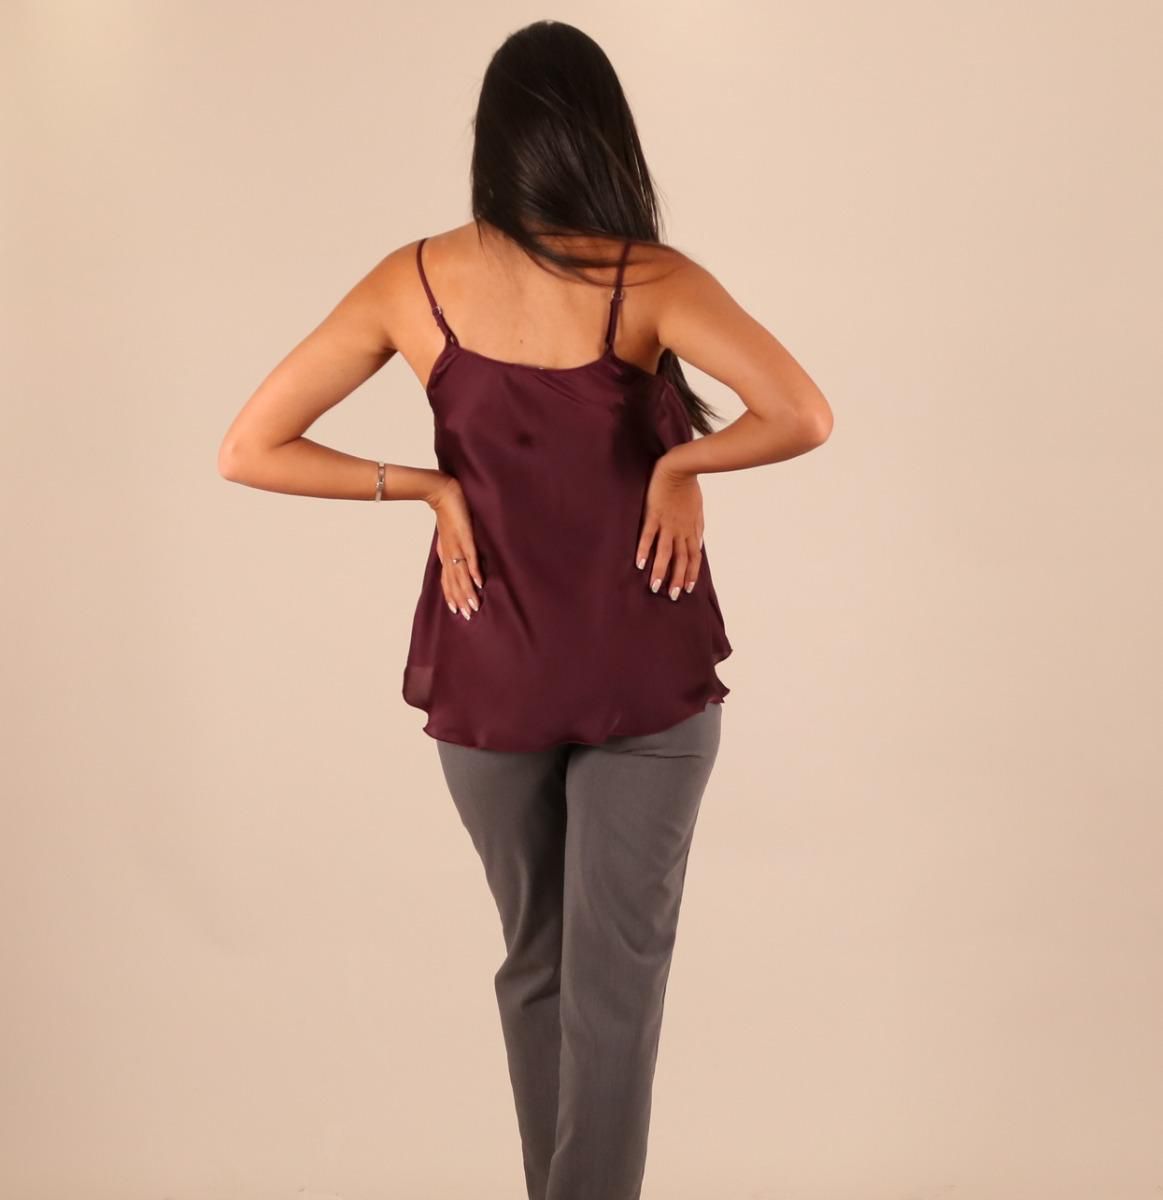 Oh9shop - Maternity Burgundy Camisole Top - Burgundy- Babystore.ae